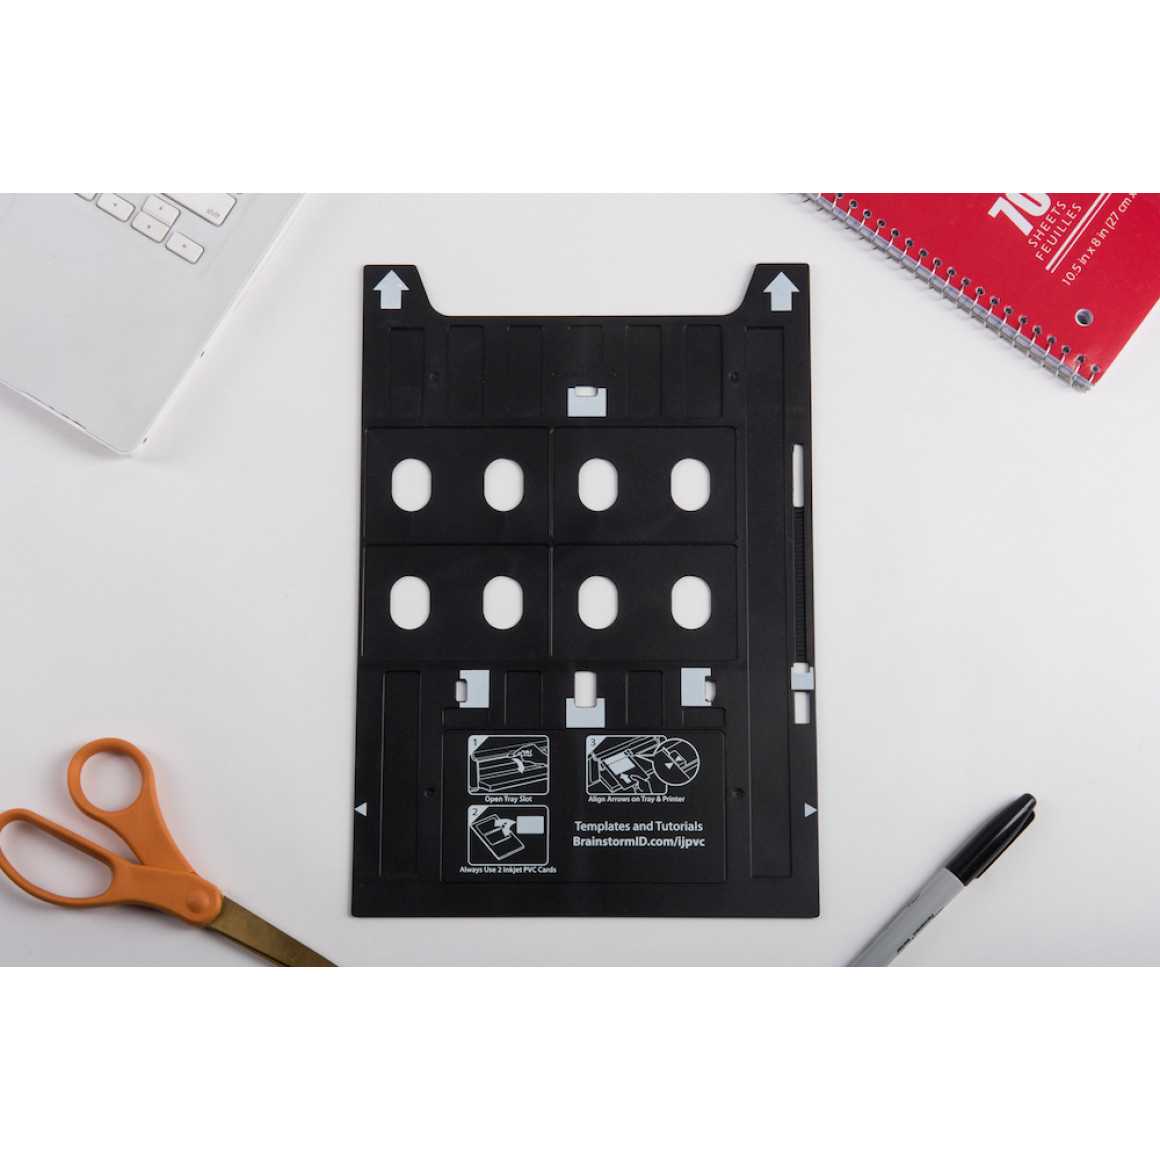 Pvc Card Tray For Epson Artisan 1430, 1430W, 1500W, R1800, And More For Pvc Card Template